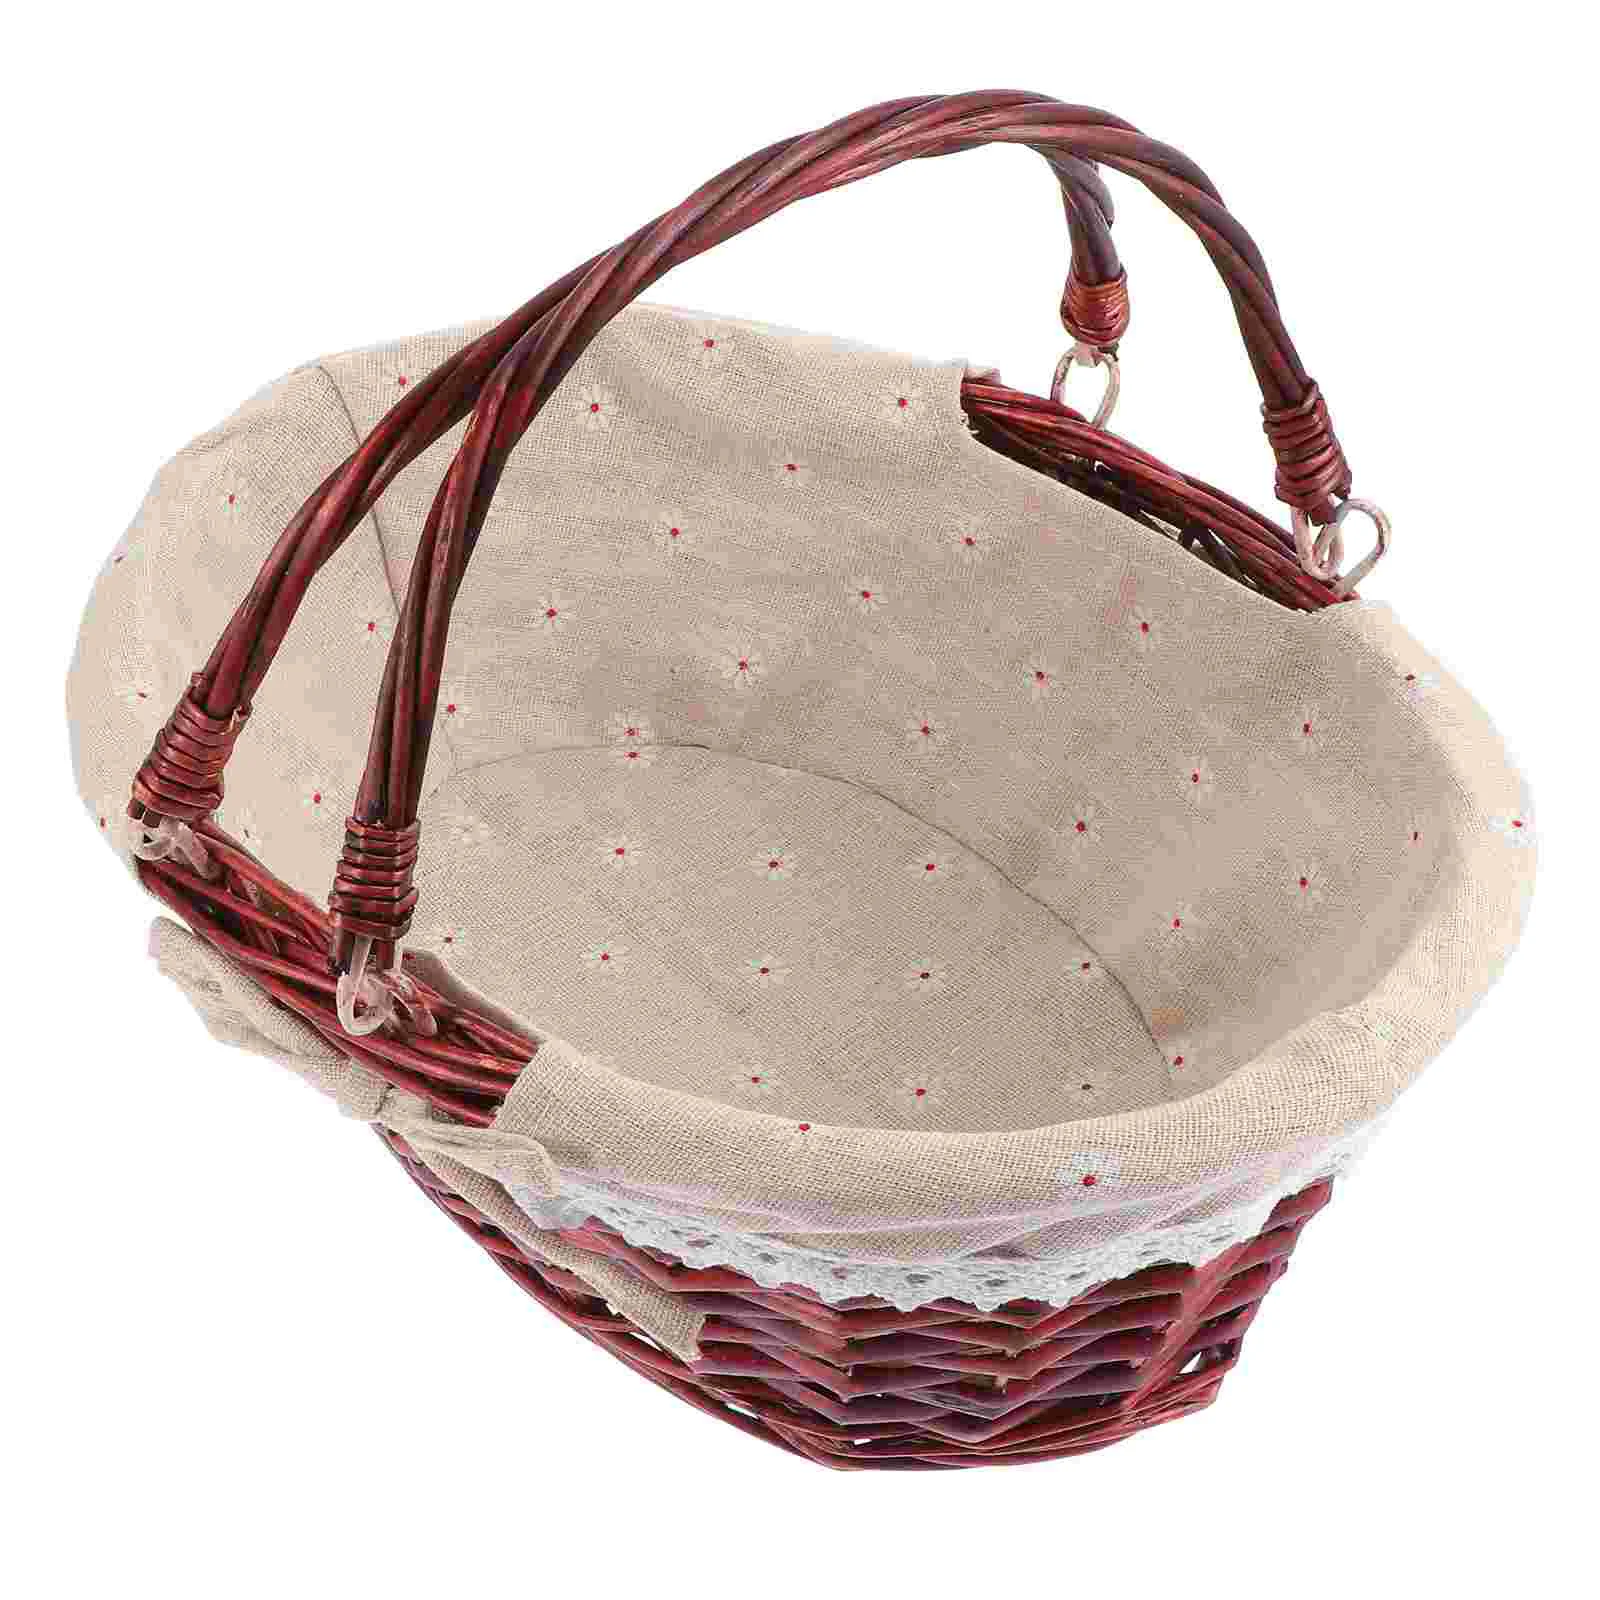 

Basket Woven Rattan Wicker Storage Tray Baskets Picnic Container Flower Bin Snacks Shopping Serving Snack Sundries Home